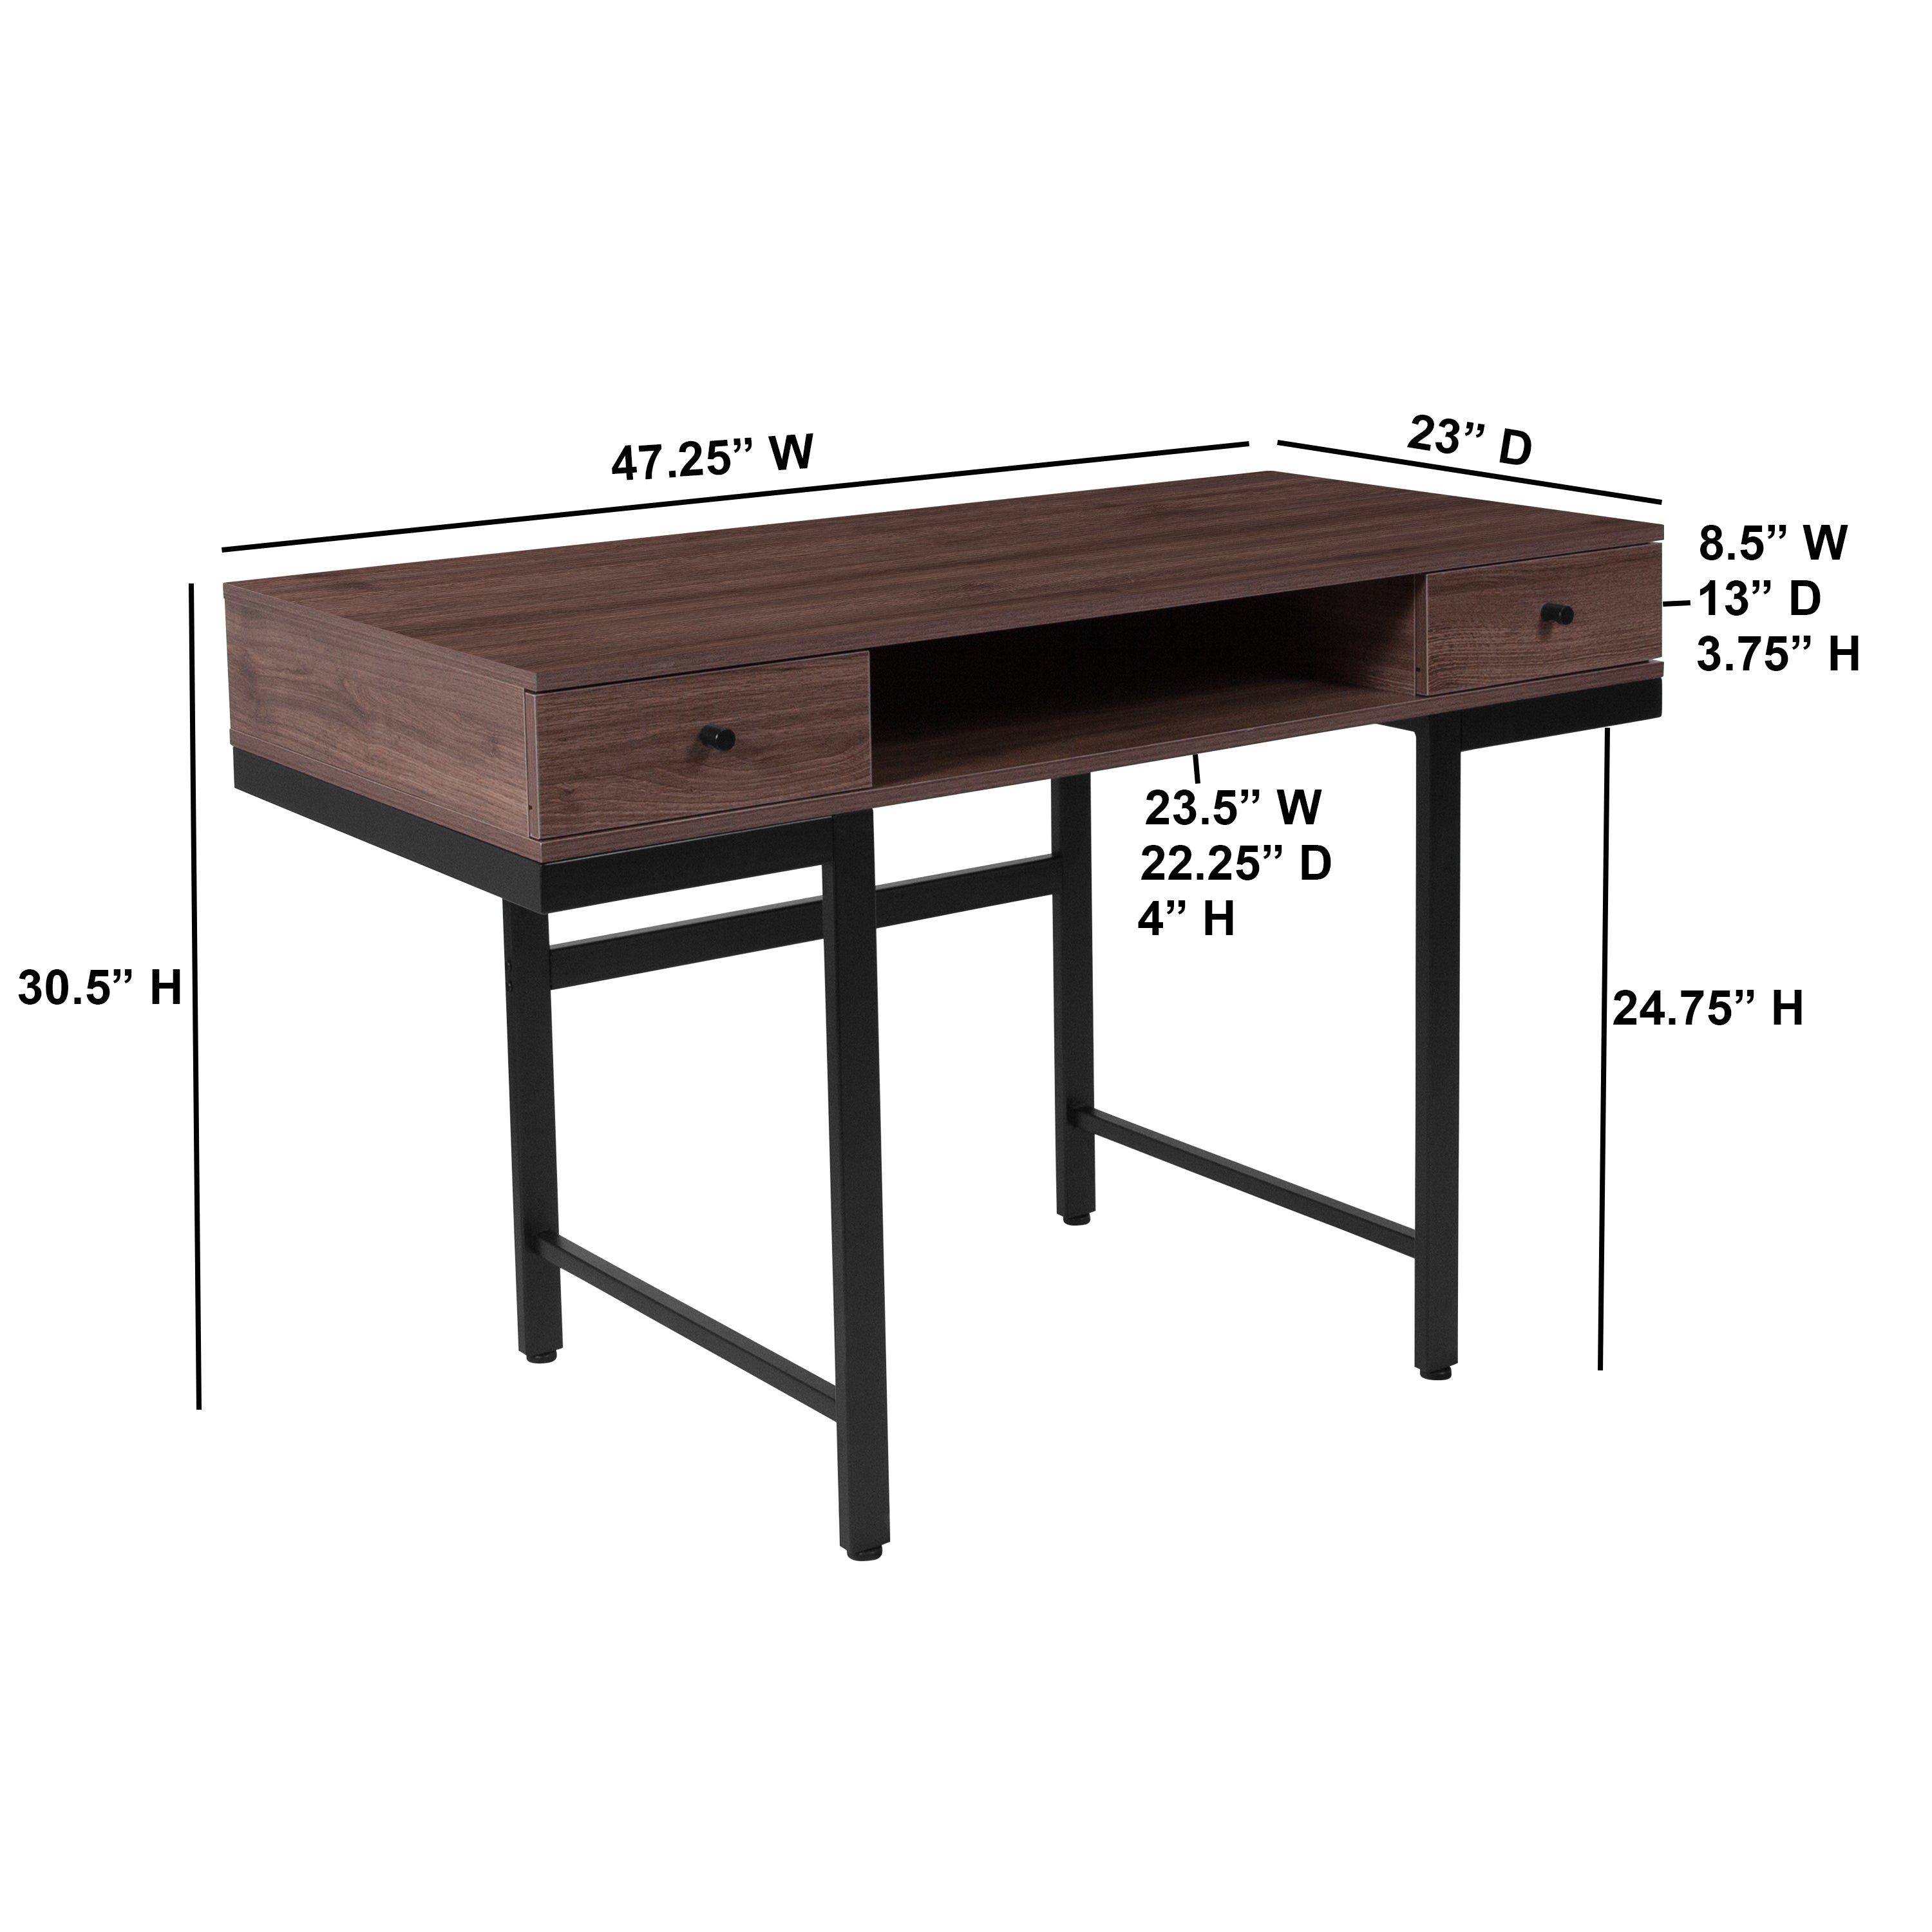 Bartlett Desk with Drawers and Black Metal Legs-Desk-Flash Furniture-Wall2Wall Furnishings